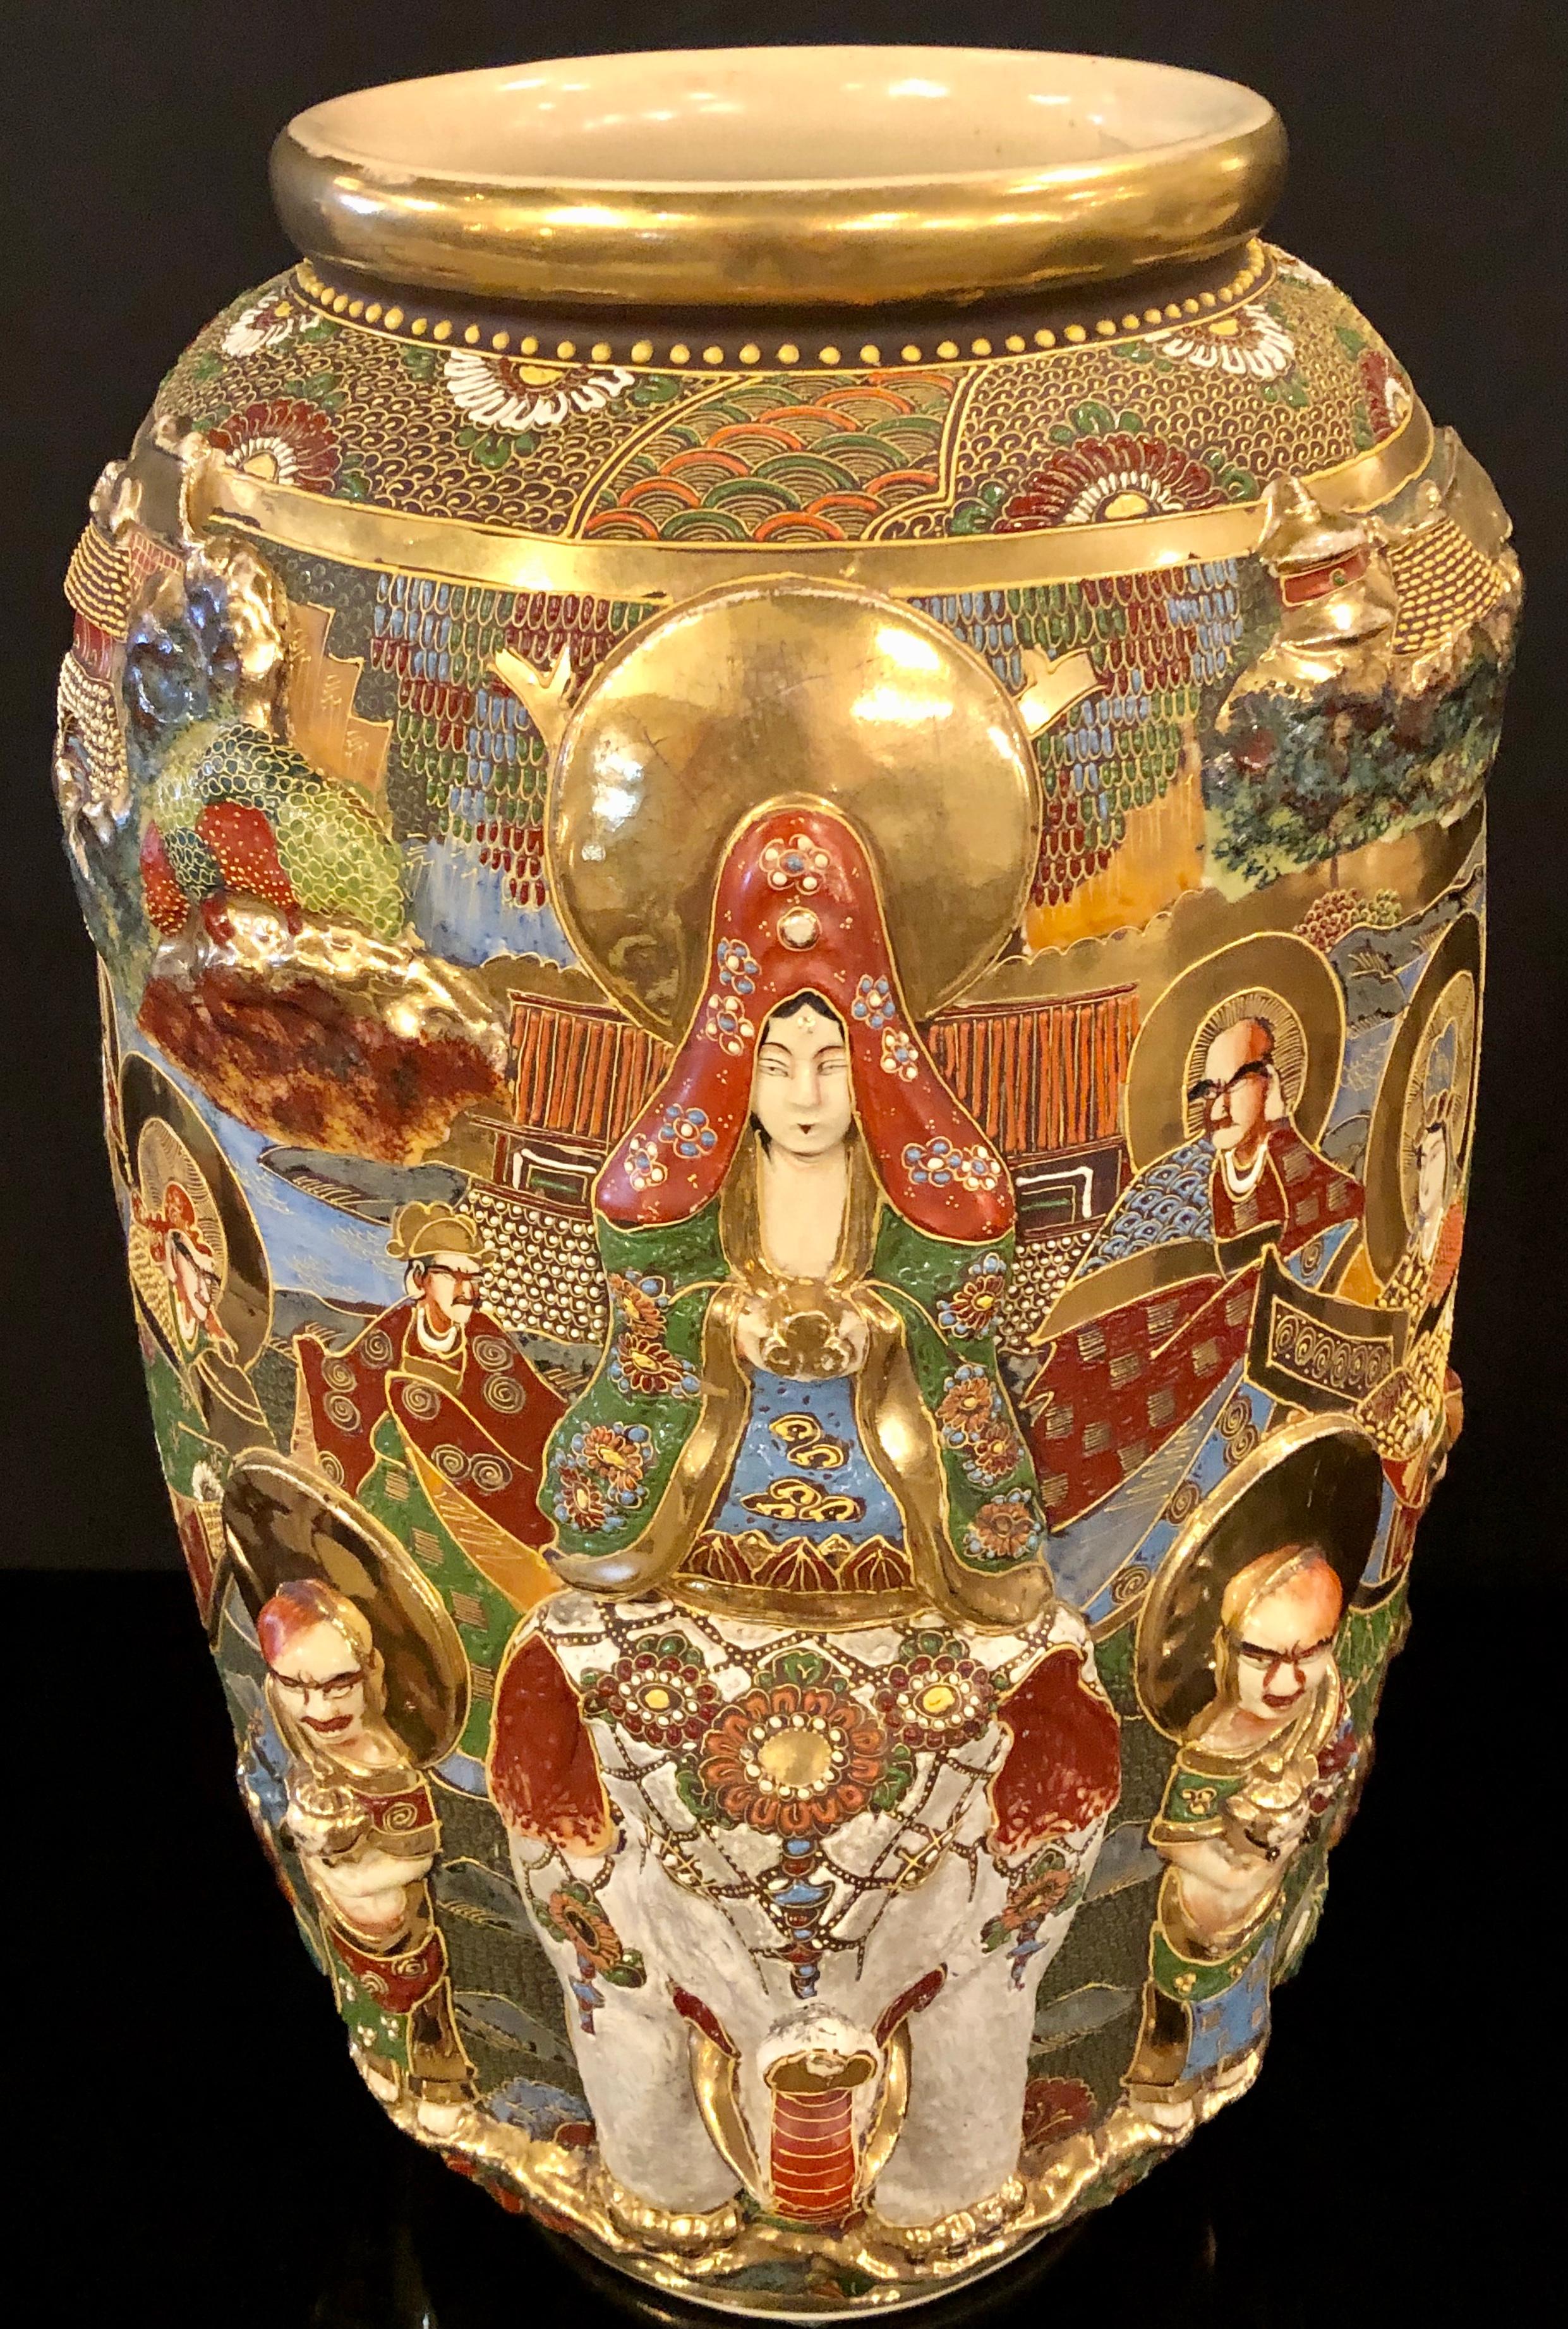 Japanese Satsuma Vase with Gold Gilt High Relief Decoration Depicting a  Goddess For Sale at 1stDibs